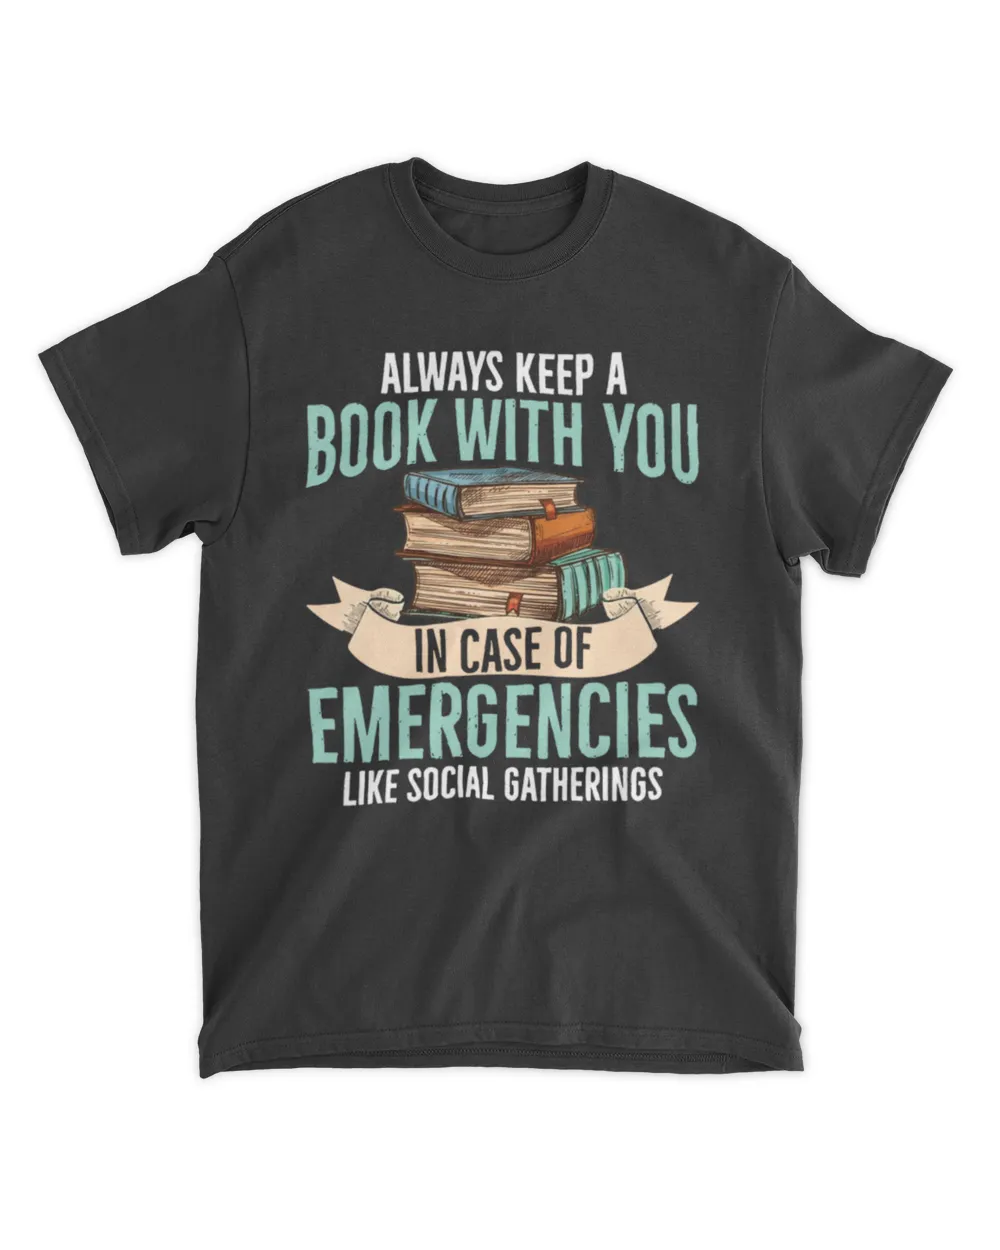 Books with you